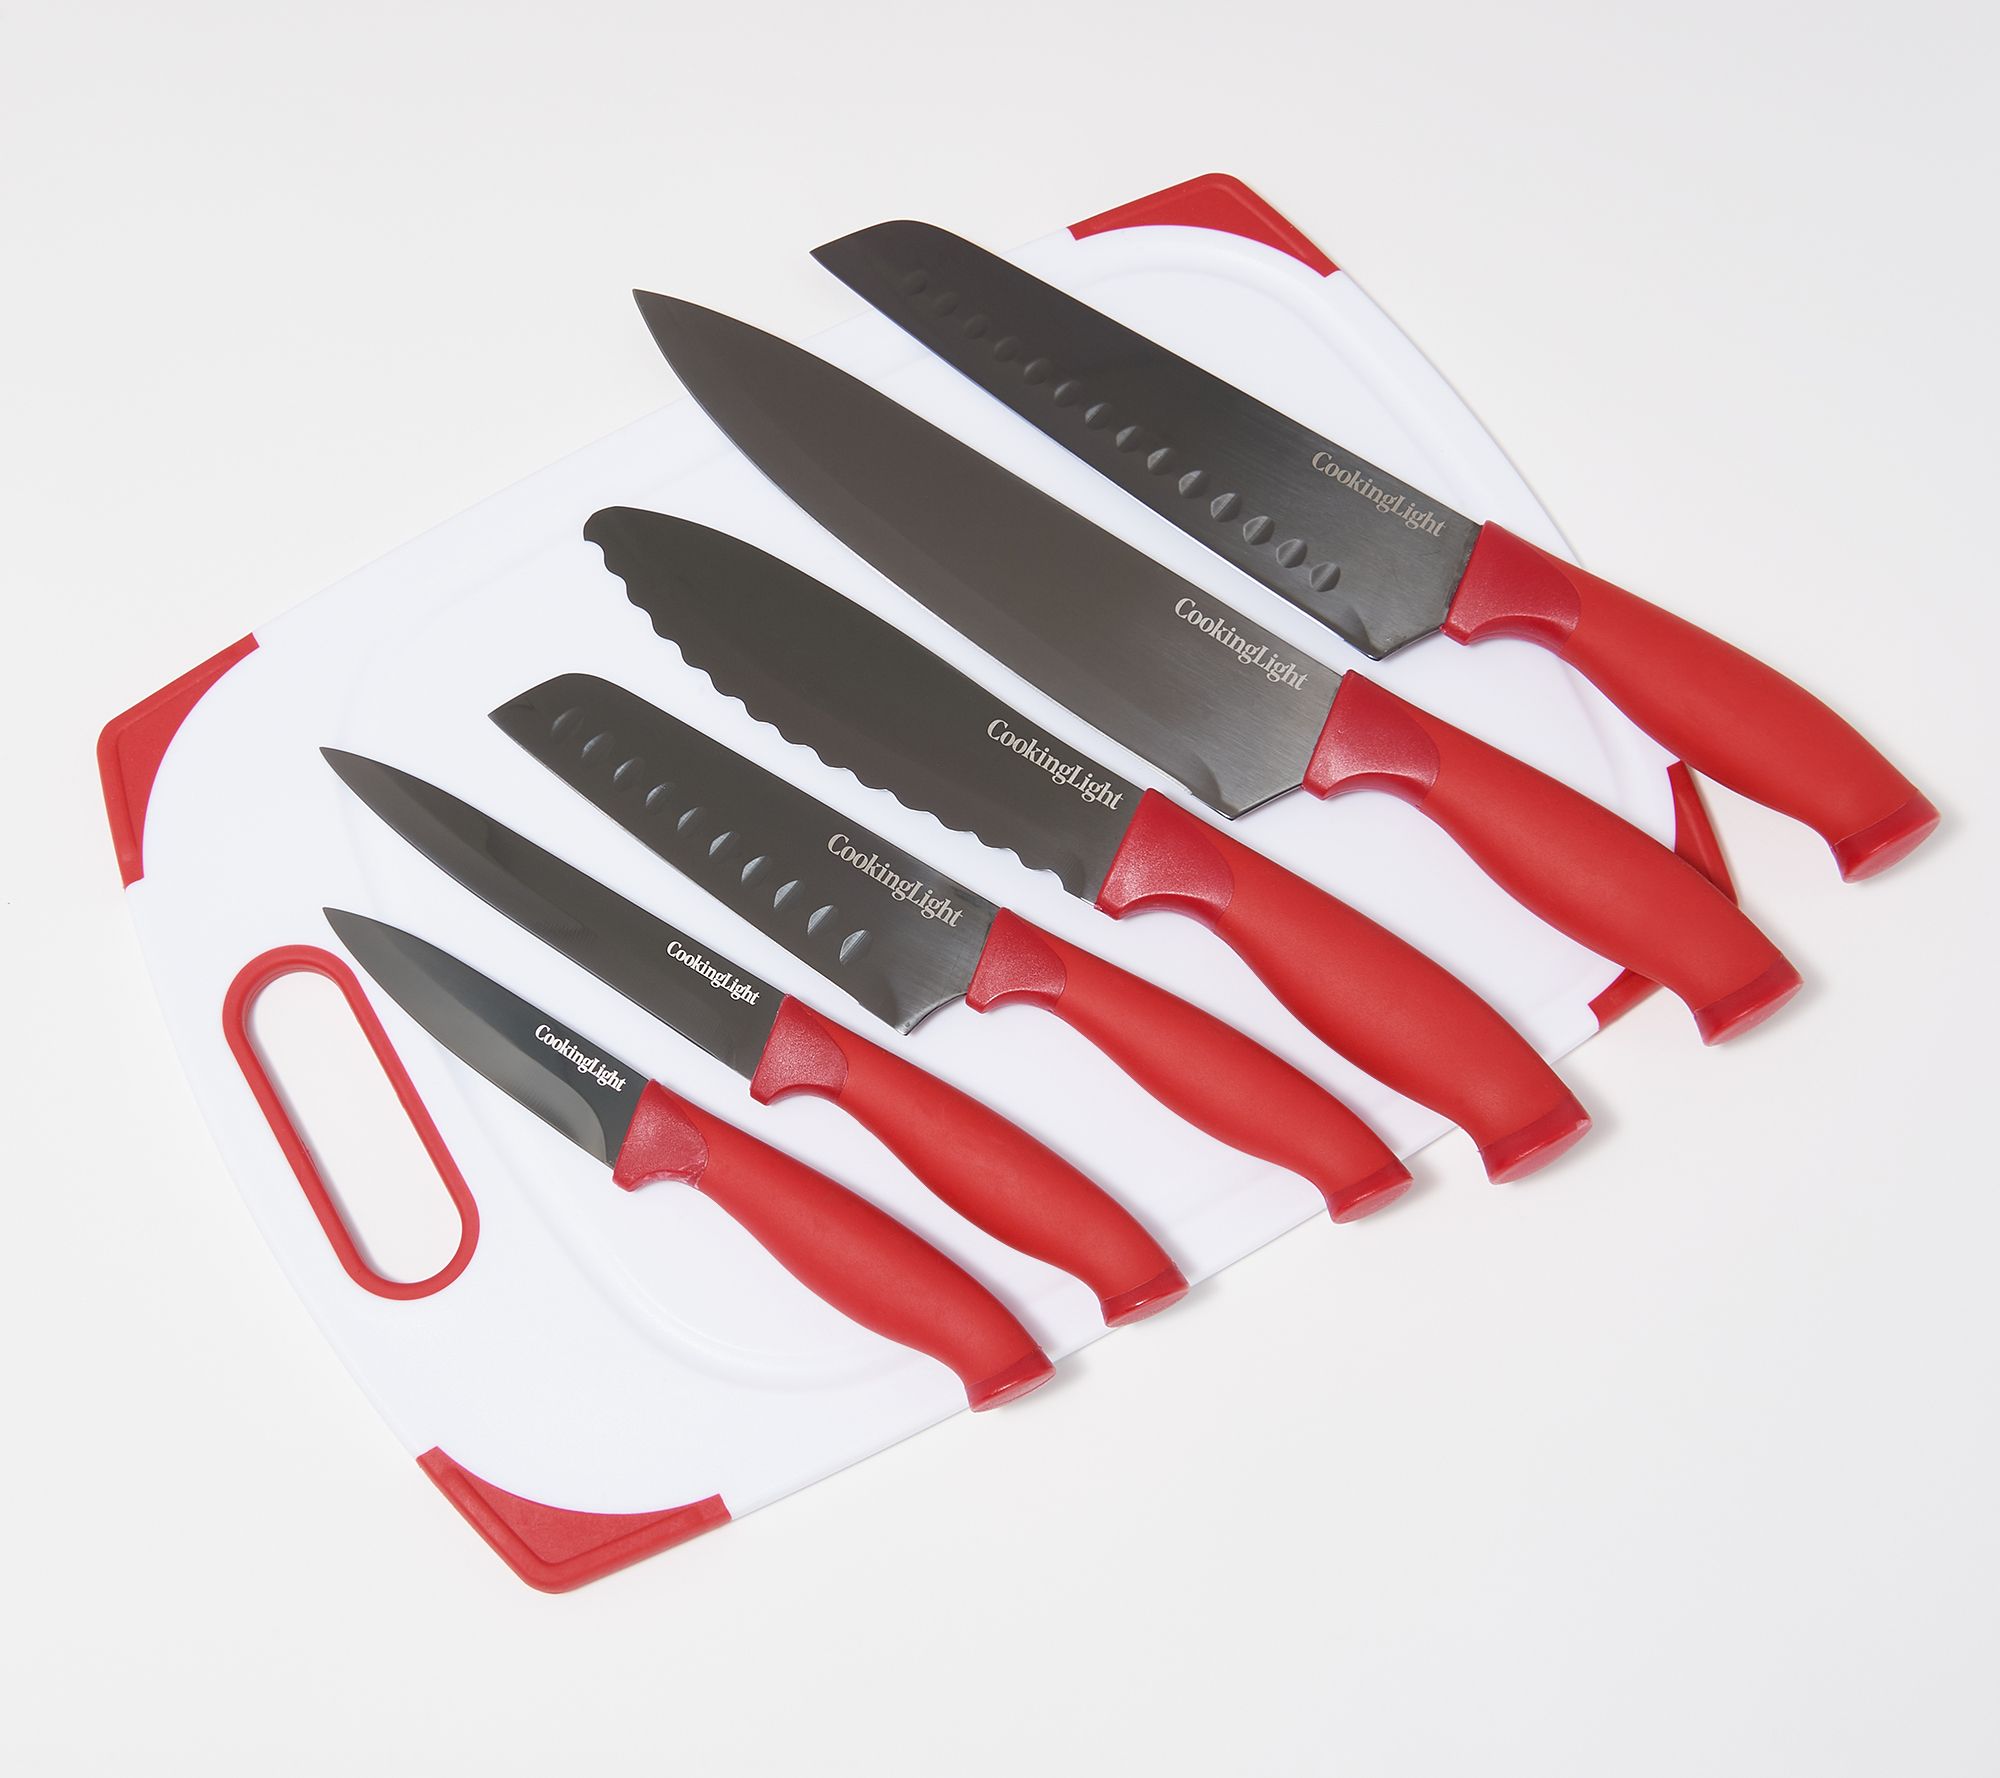 Oster Edgefield 14 Piece Stainless Steel Cutlery Knife Set With Black Knife  Block : Target